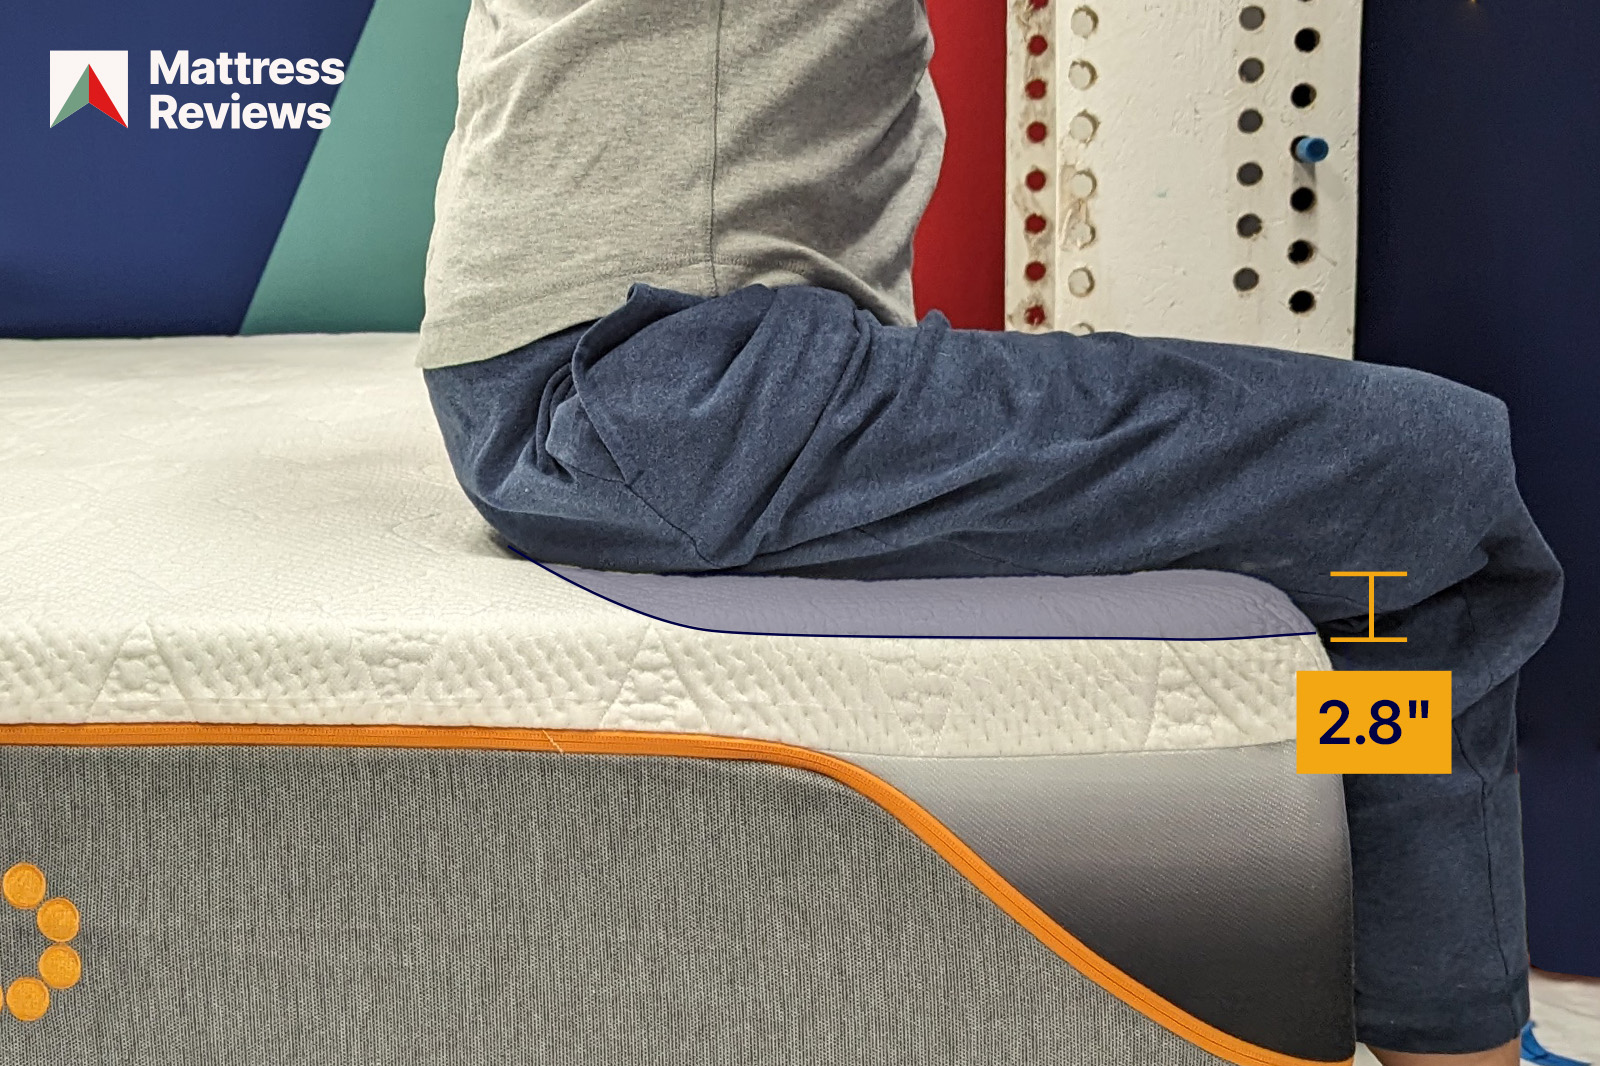 Image of a mannequin sitting on the edge of the Dormeo mattress leaving an impression that indicates the amount of edge support